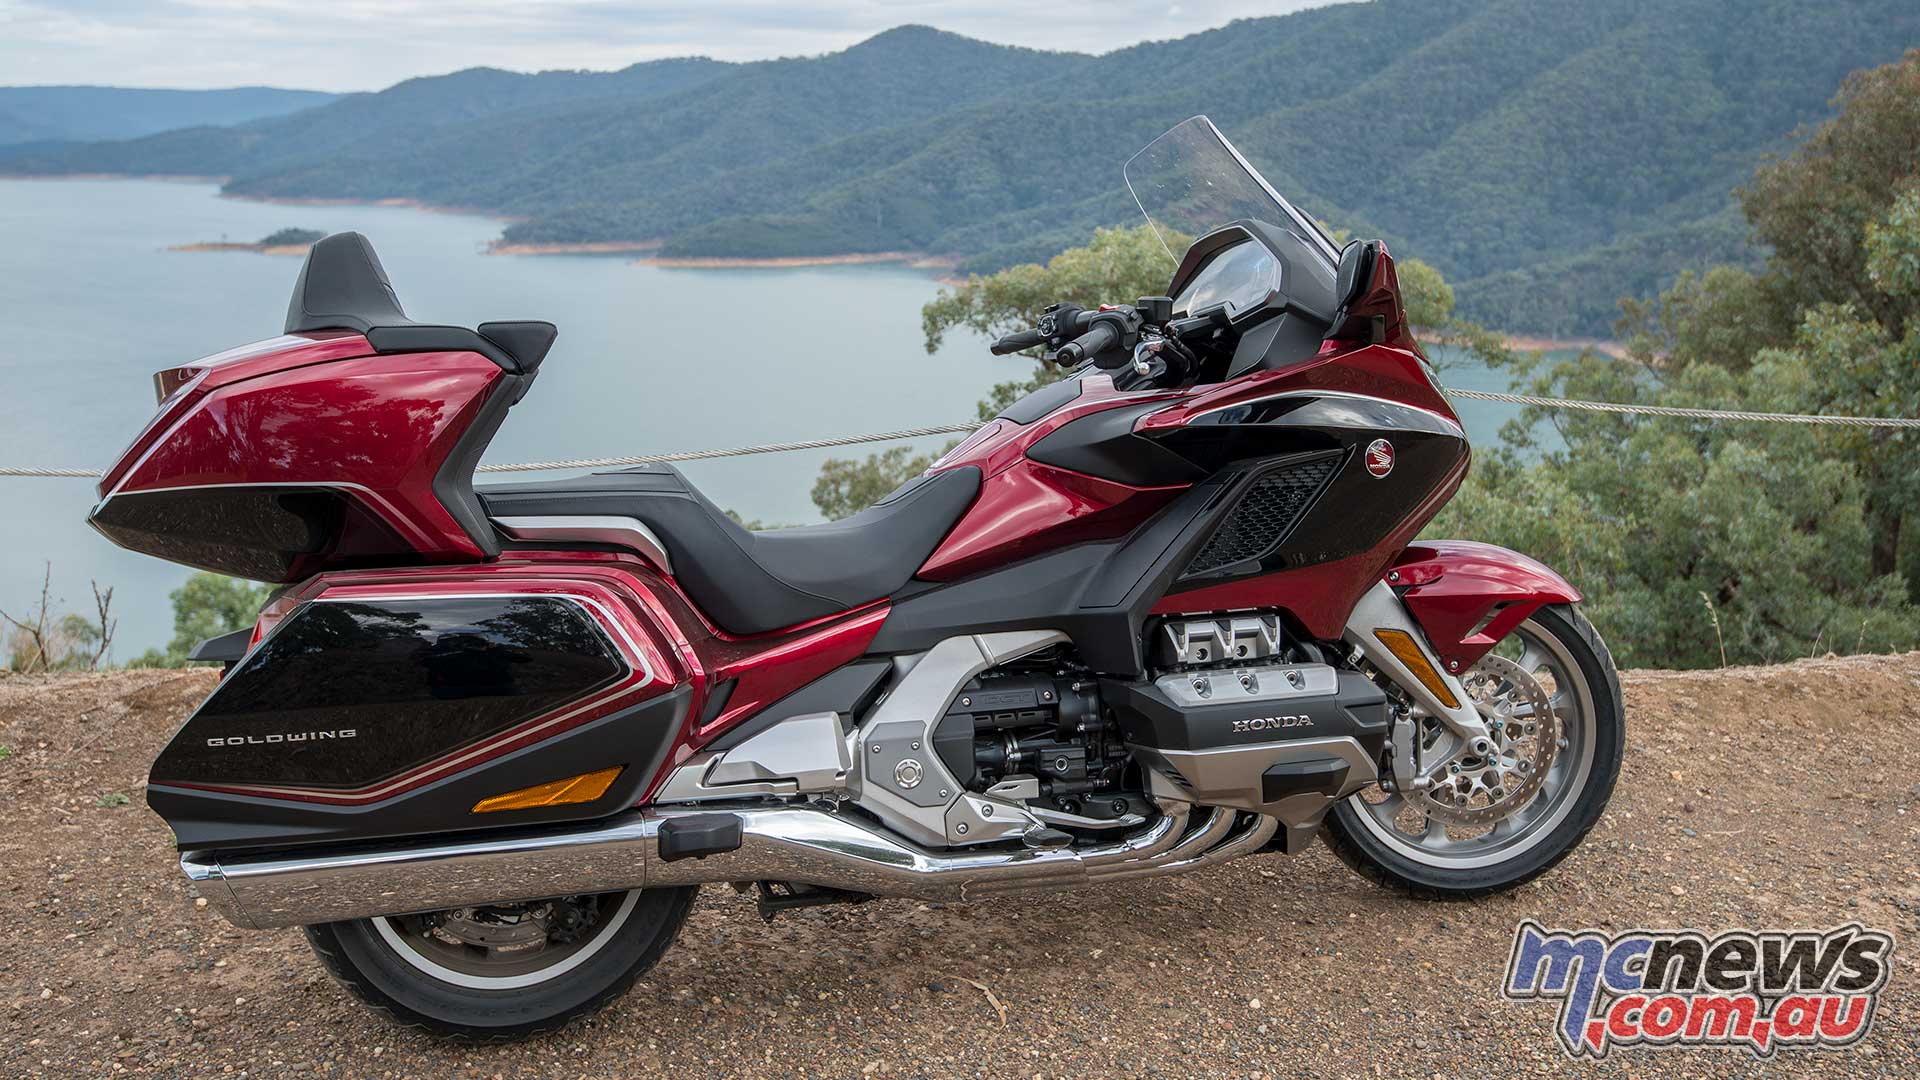 Winging my way home on the new Honda Gold Wing. Motorcycle News, Sport and Reviews